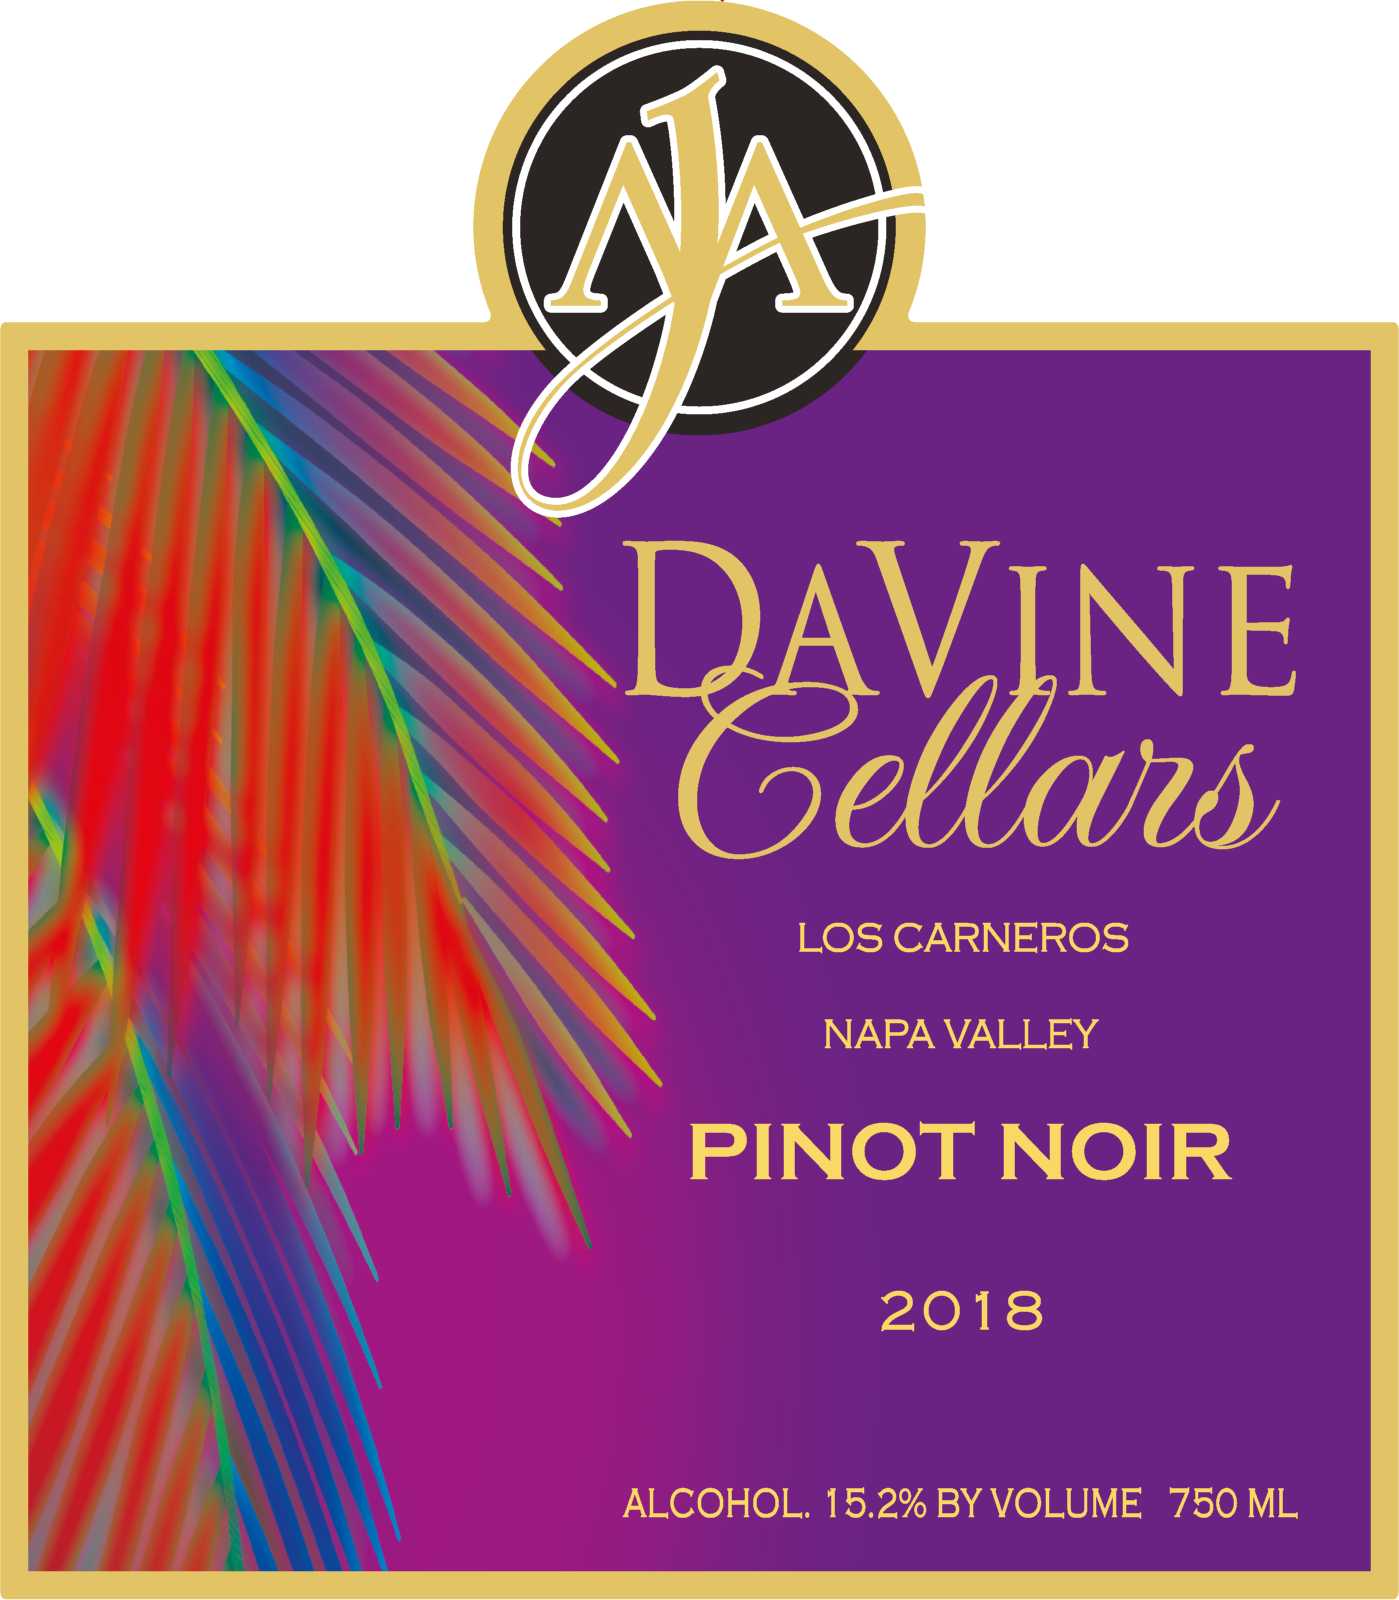 Product Image for 2018 Los Carneros Pinot Noir "Burlesque"